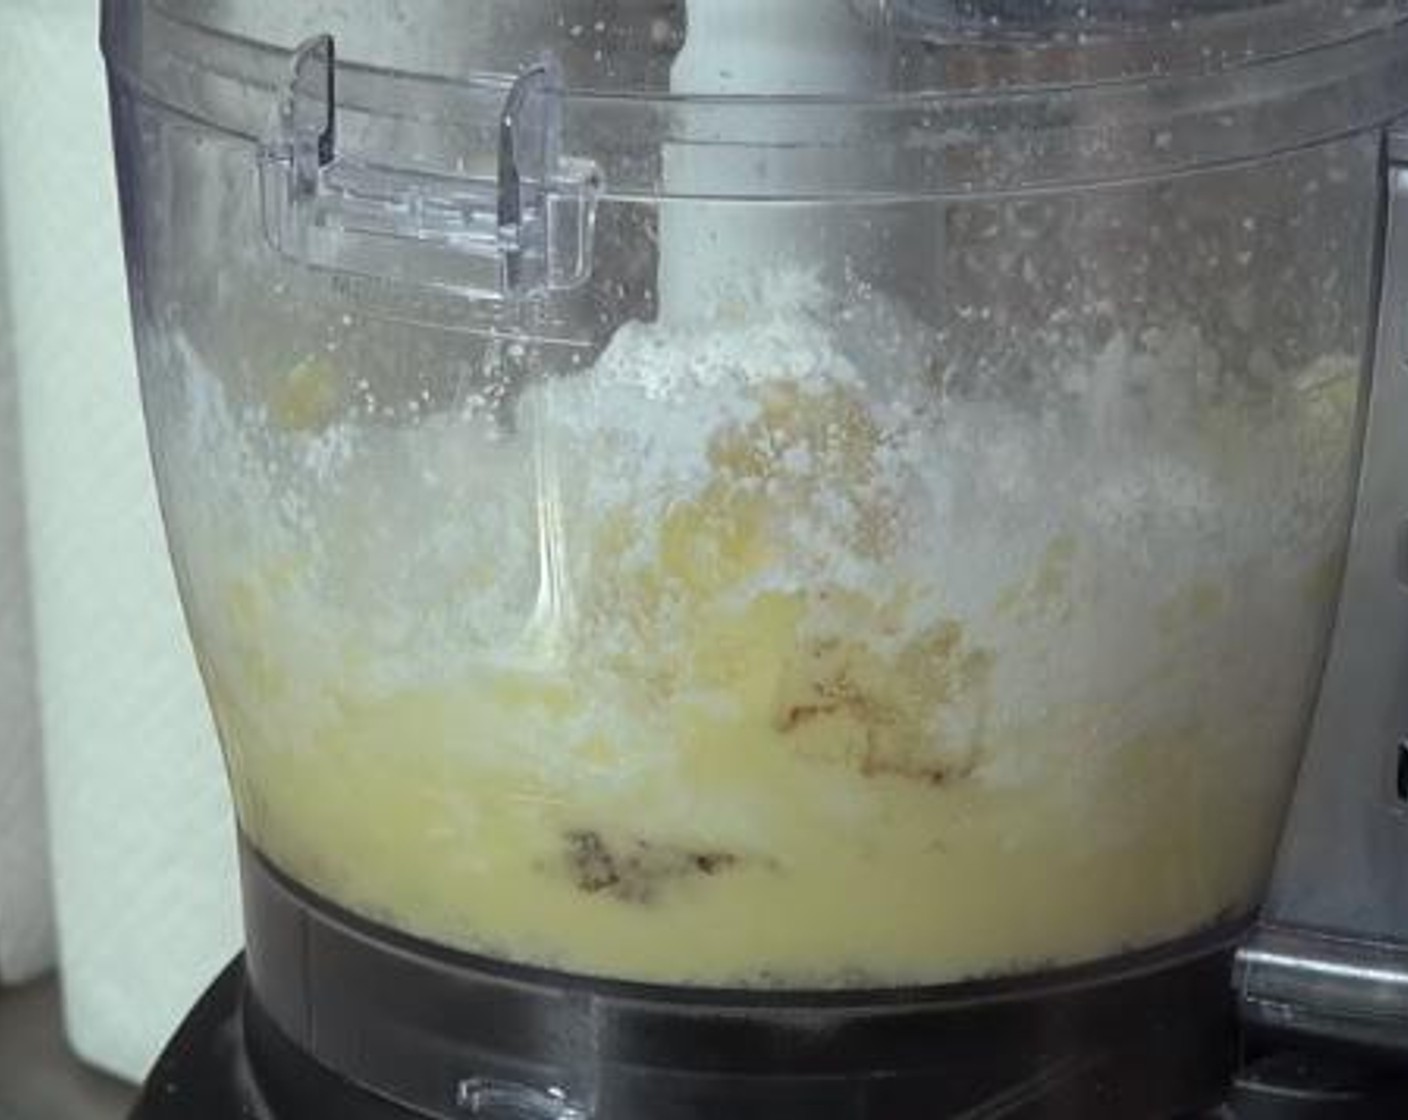 step 2 Into a food processor, add the Butter (1/2 cup) and Caster Sugar (1/2 cup). Process until it is nice and creamy.